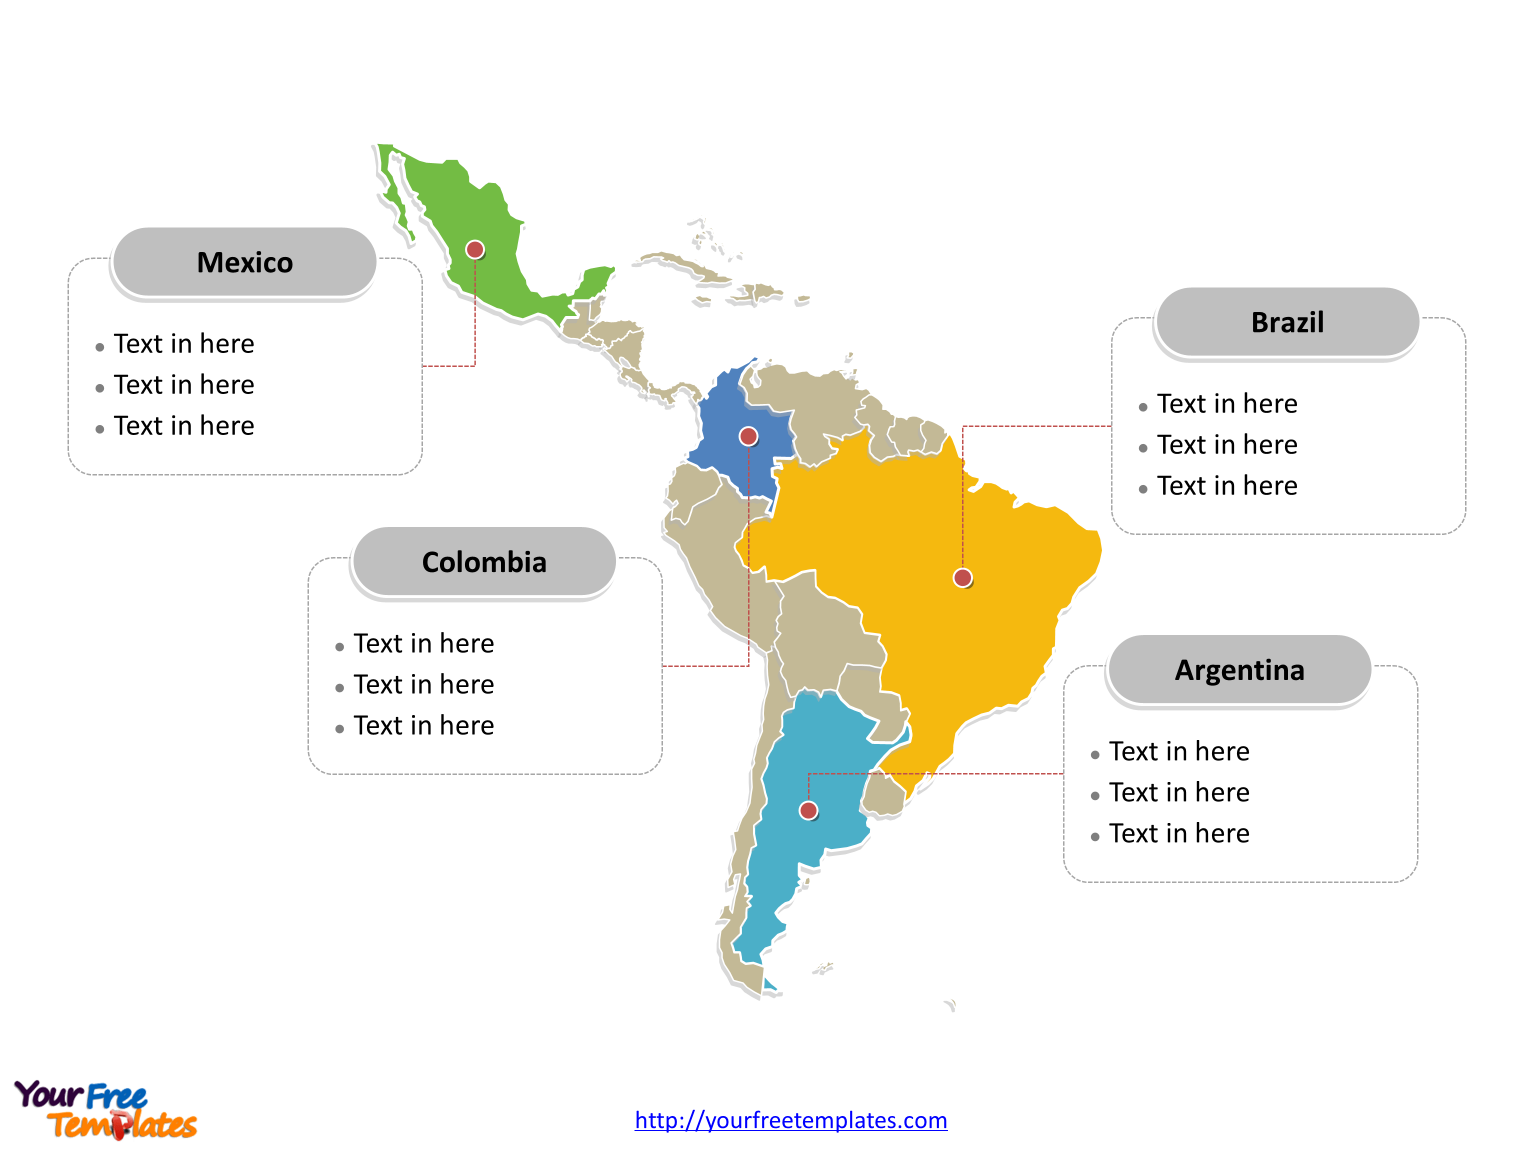 Map of Latin America with political division and major Countries labeled on the Blank Latin America map free templates